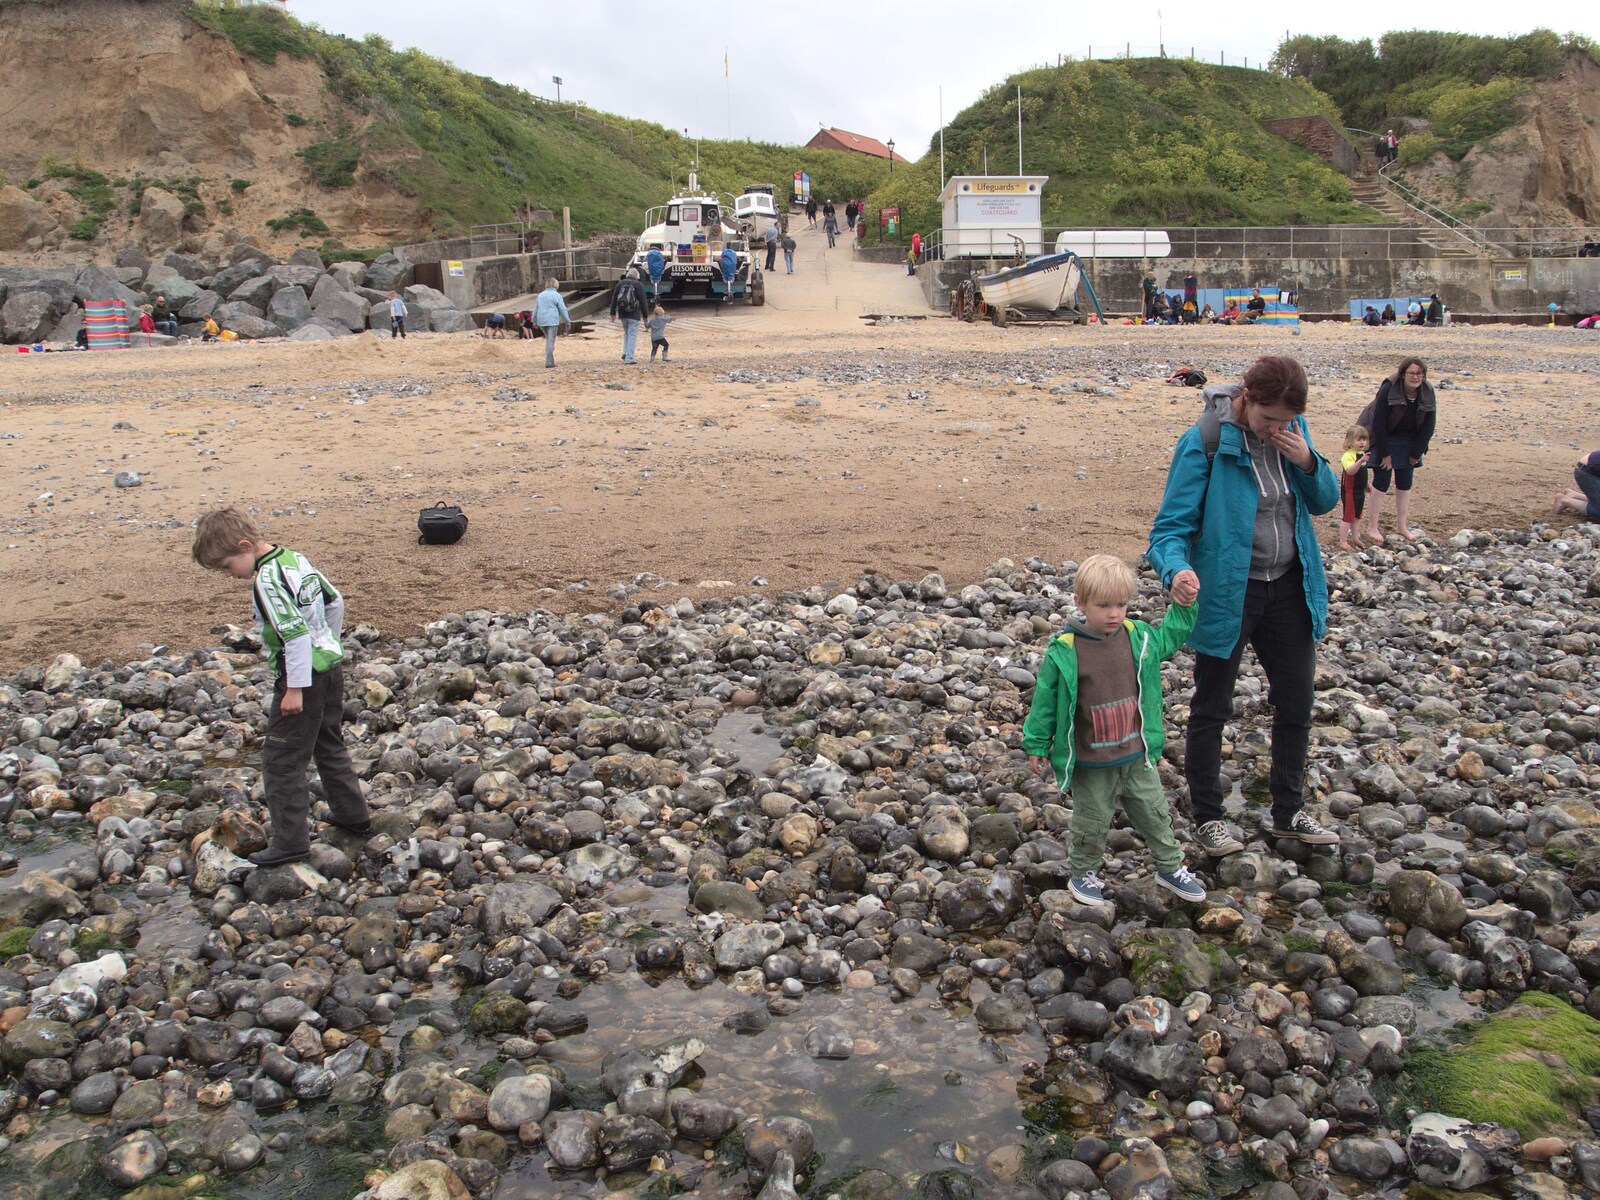 Fred, Harry and Isobel roam the beach from A Birthday Camping Trip, East Runton, North Norfolk - 26th May 2015